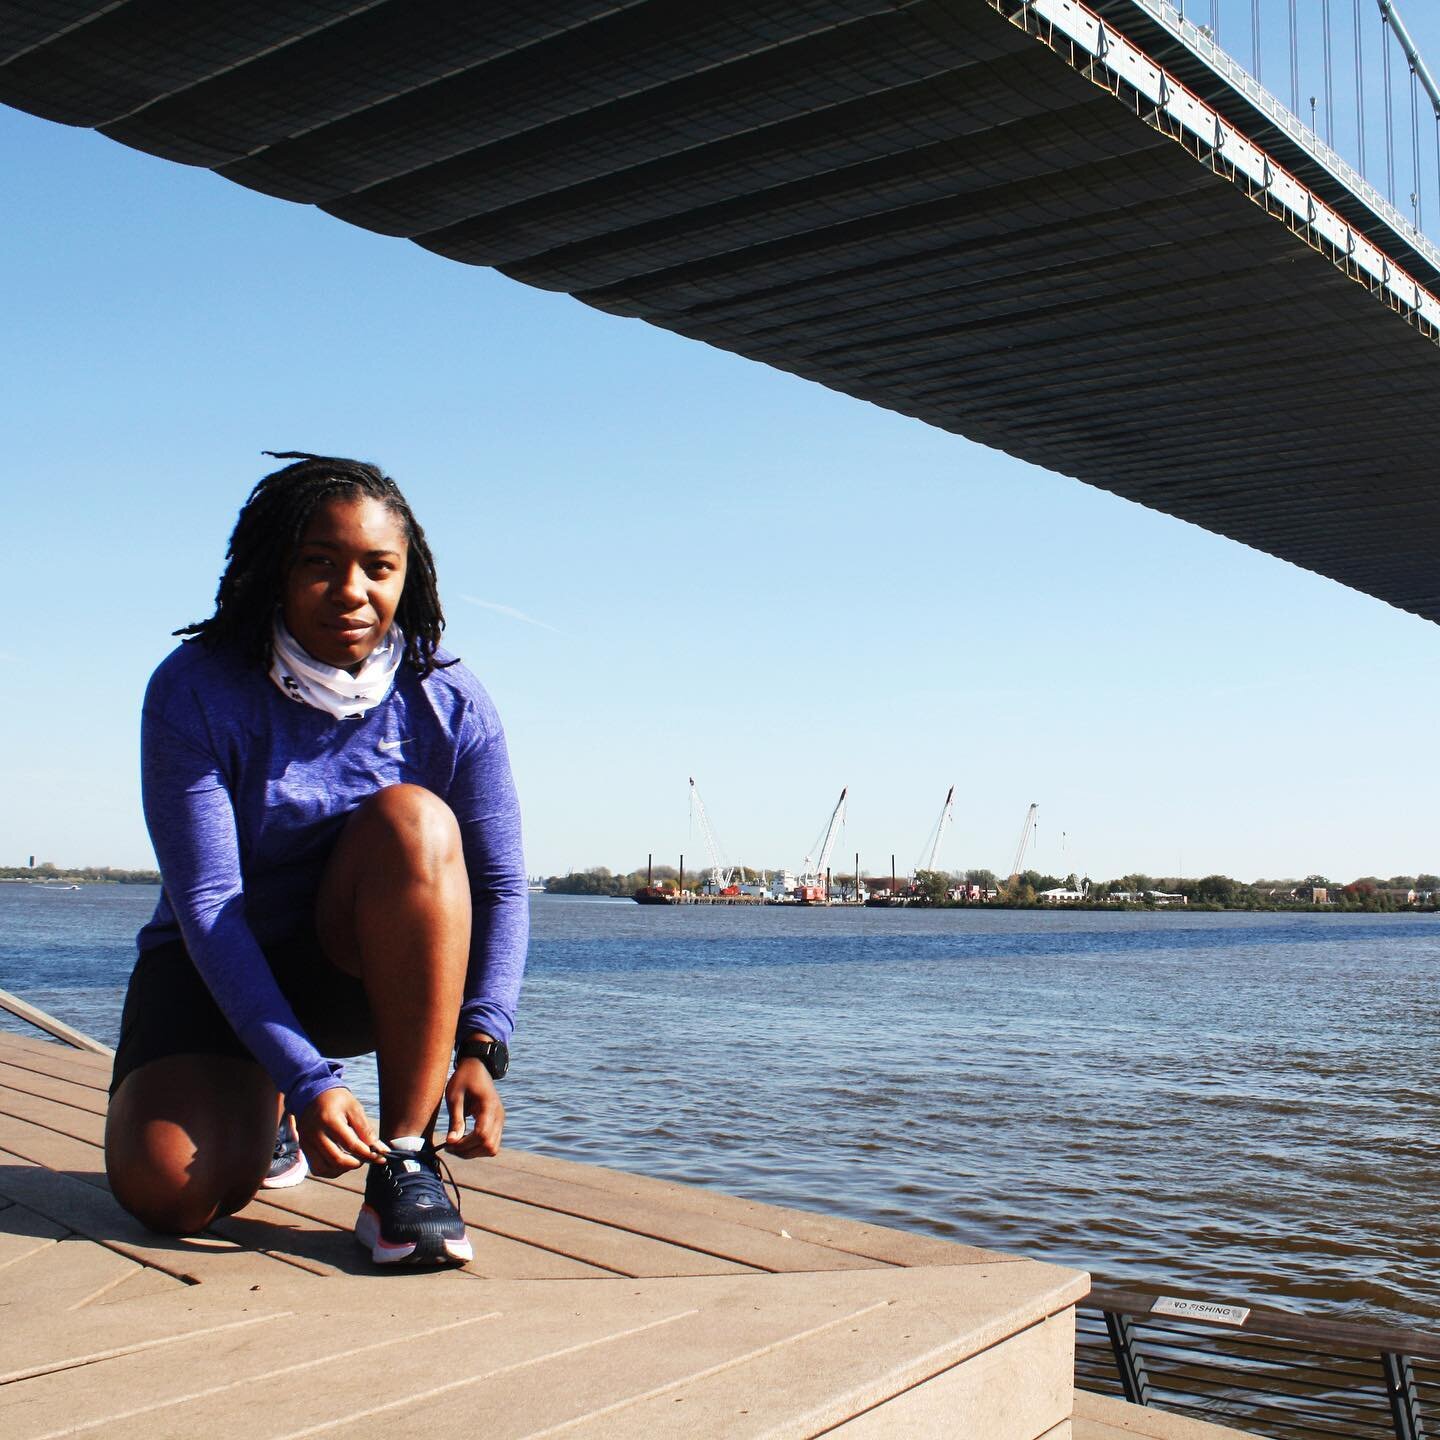 Our friend Takia McClendon, of City Fit Girls is in the running to receive The People&rsquo;s Choice award to bring her program, Strides, to life. 

Strides is a new running-based fitness community that will work to make running more approachable and